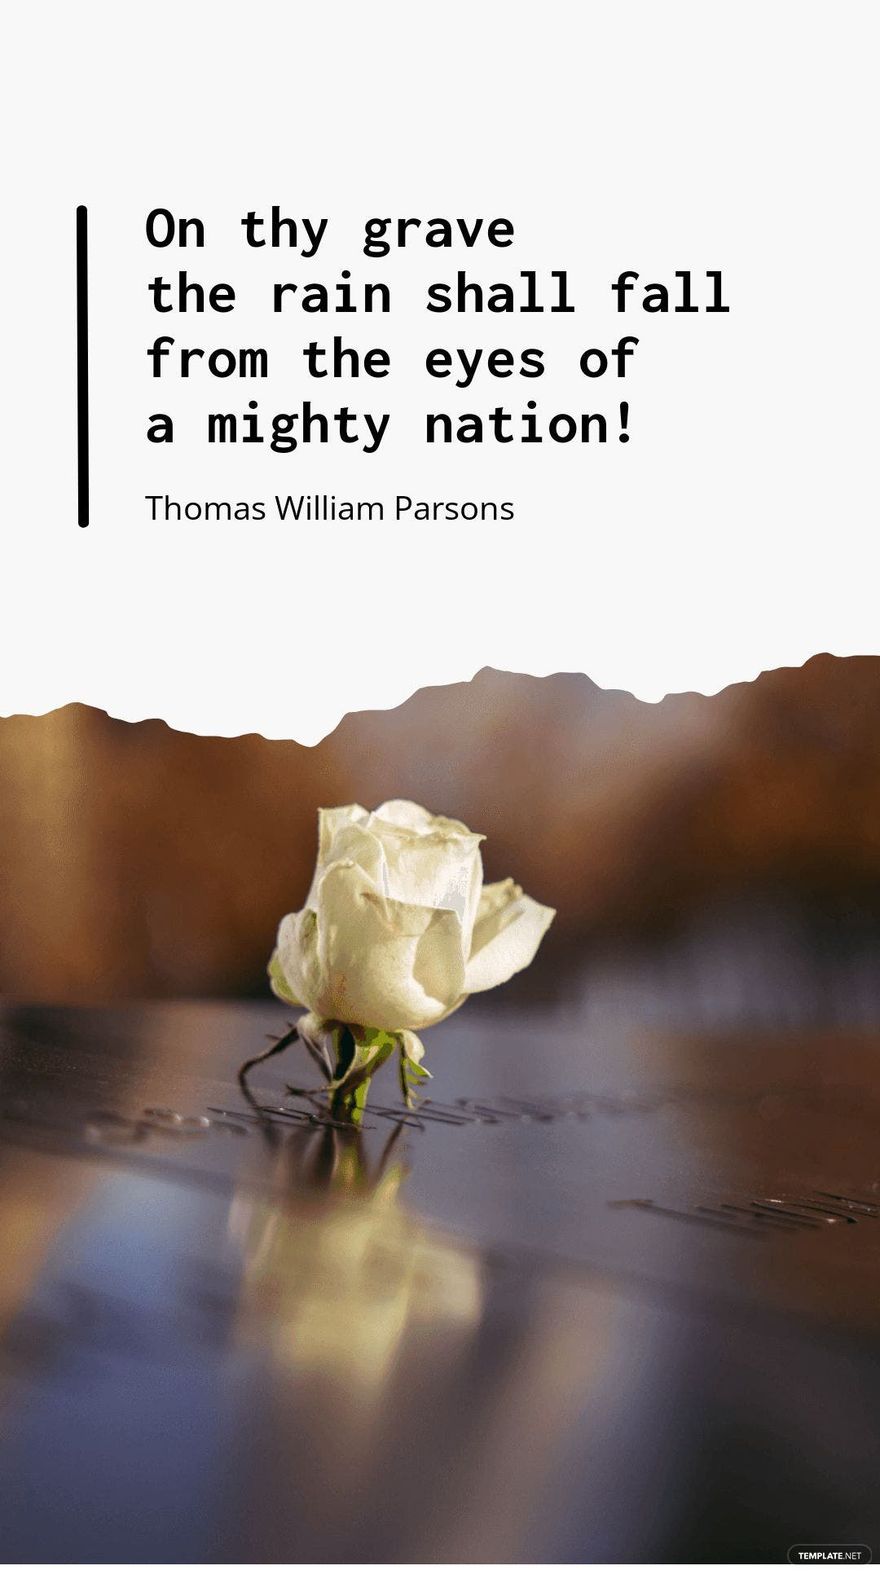 Thomas William Parsons - On thy grave the rain shall fall from the eyes of a mighty nation!